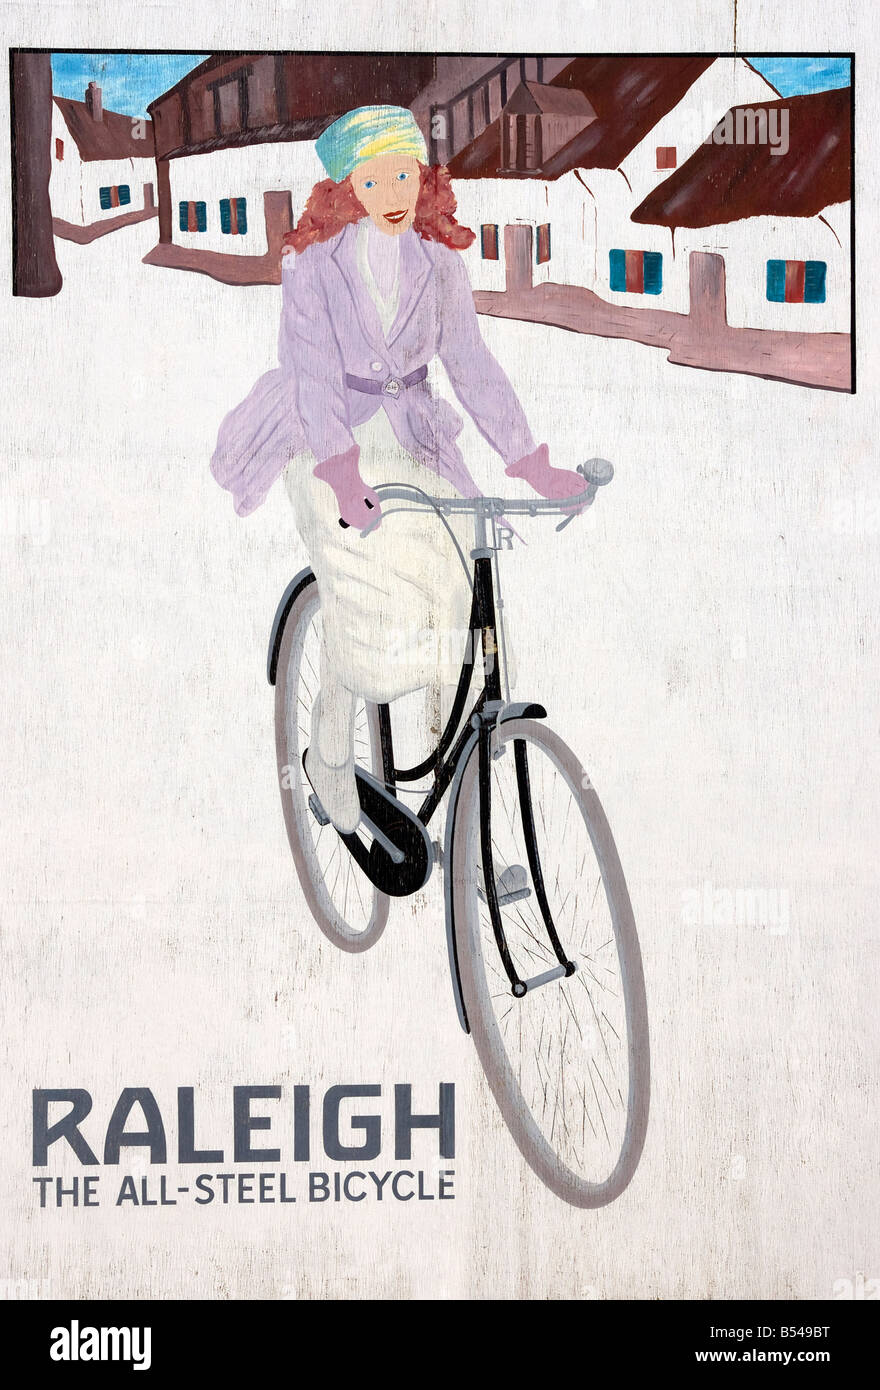 raleigh the all steel bicycle old advertising sign cycling bike alternative transport Stock Photo